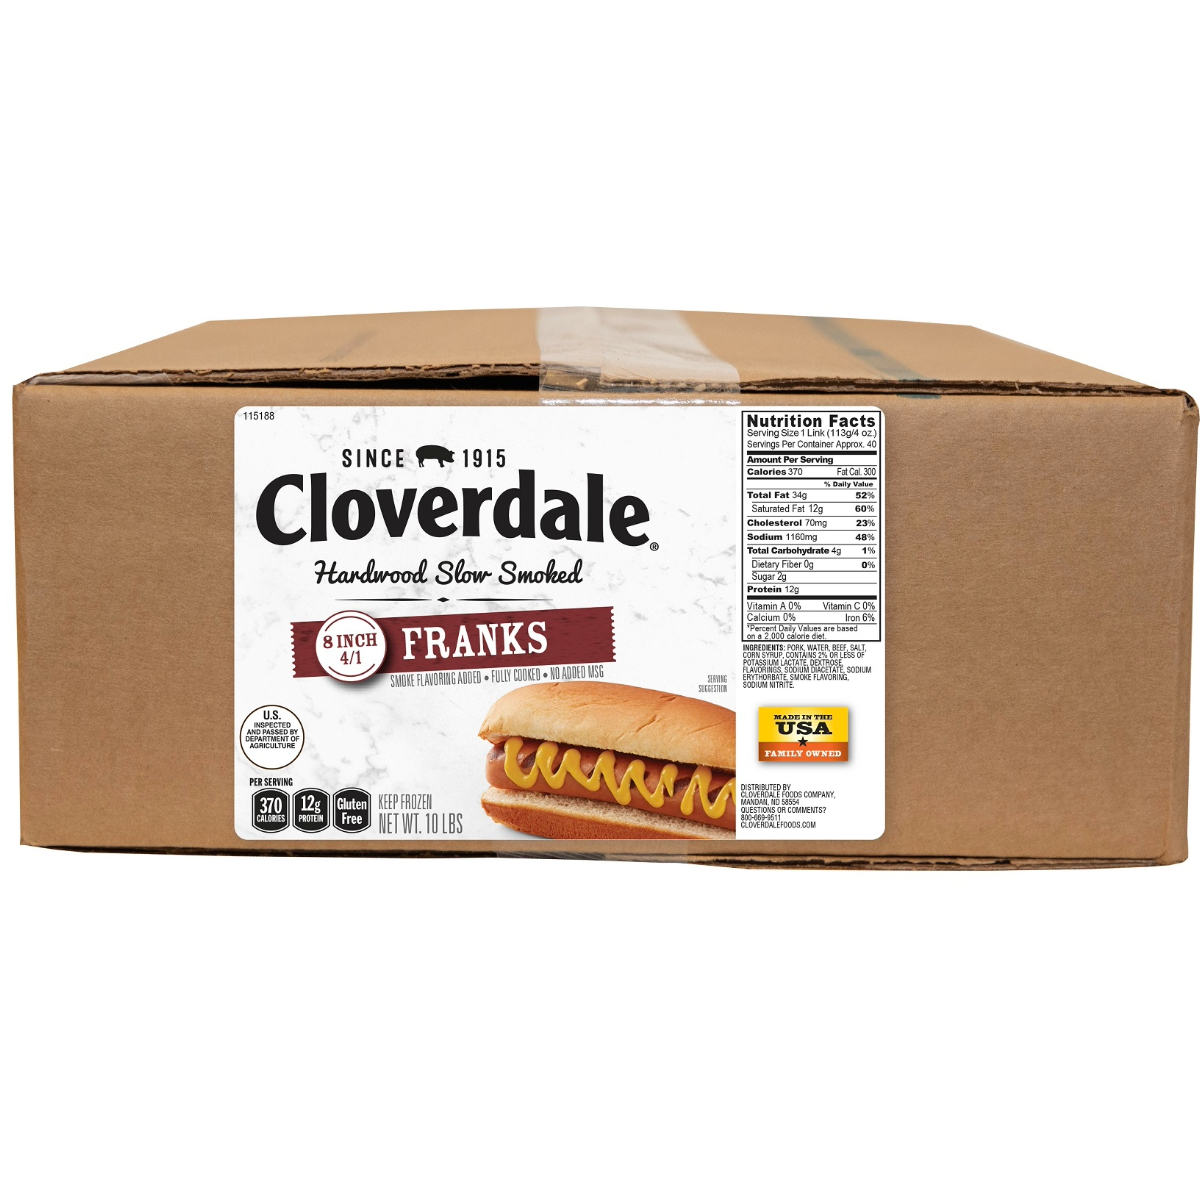 CLOVERDALE MEAT HOT DOGS 8 INCH 4/1 FRANKS